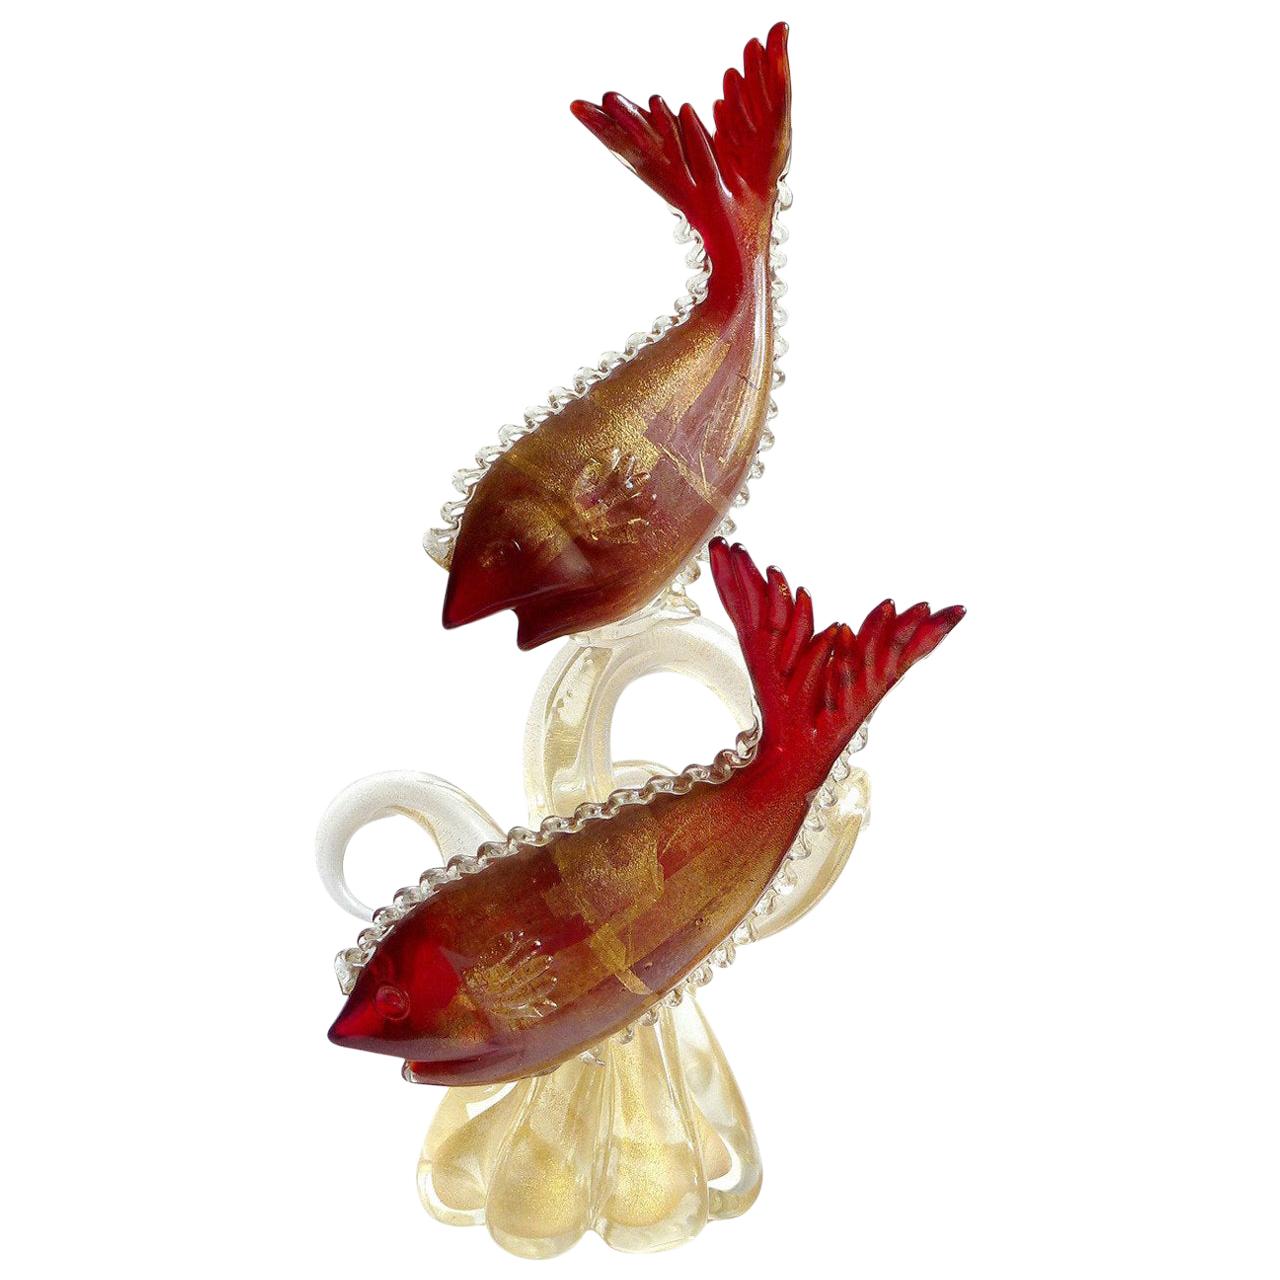 Murano Red Fish Gold Fleck Coral Tendril Italian Art Glass Centerpiece Sculpture For Sale